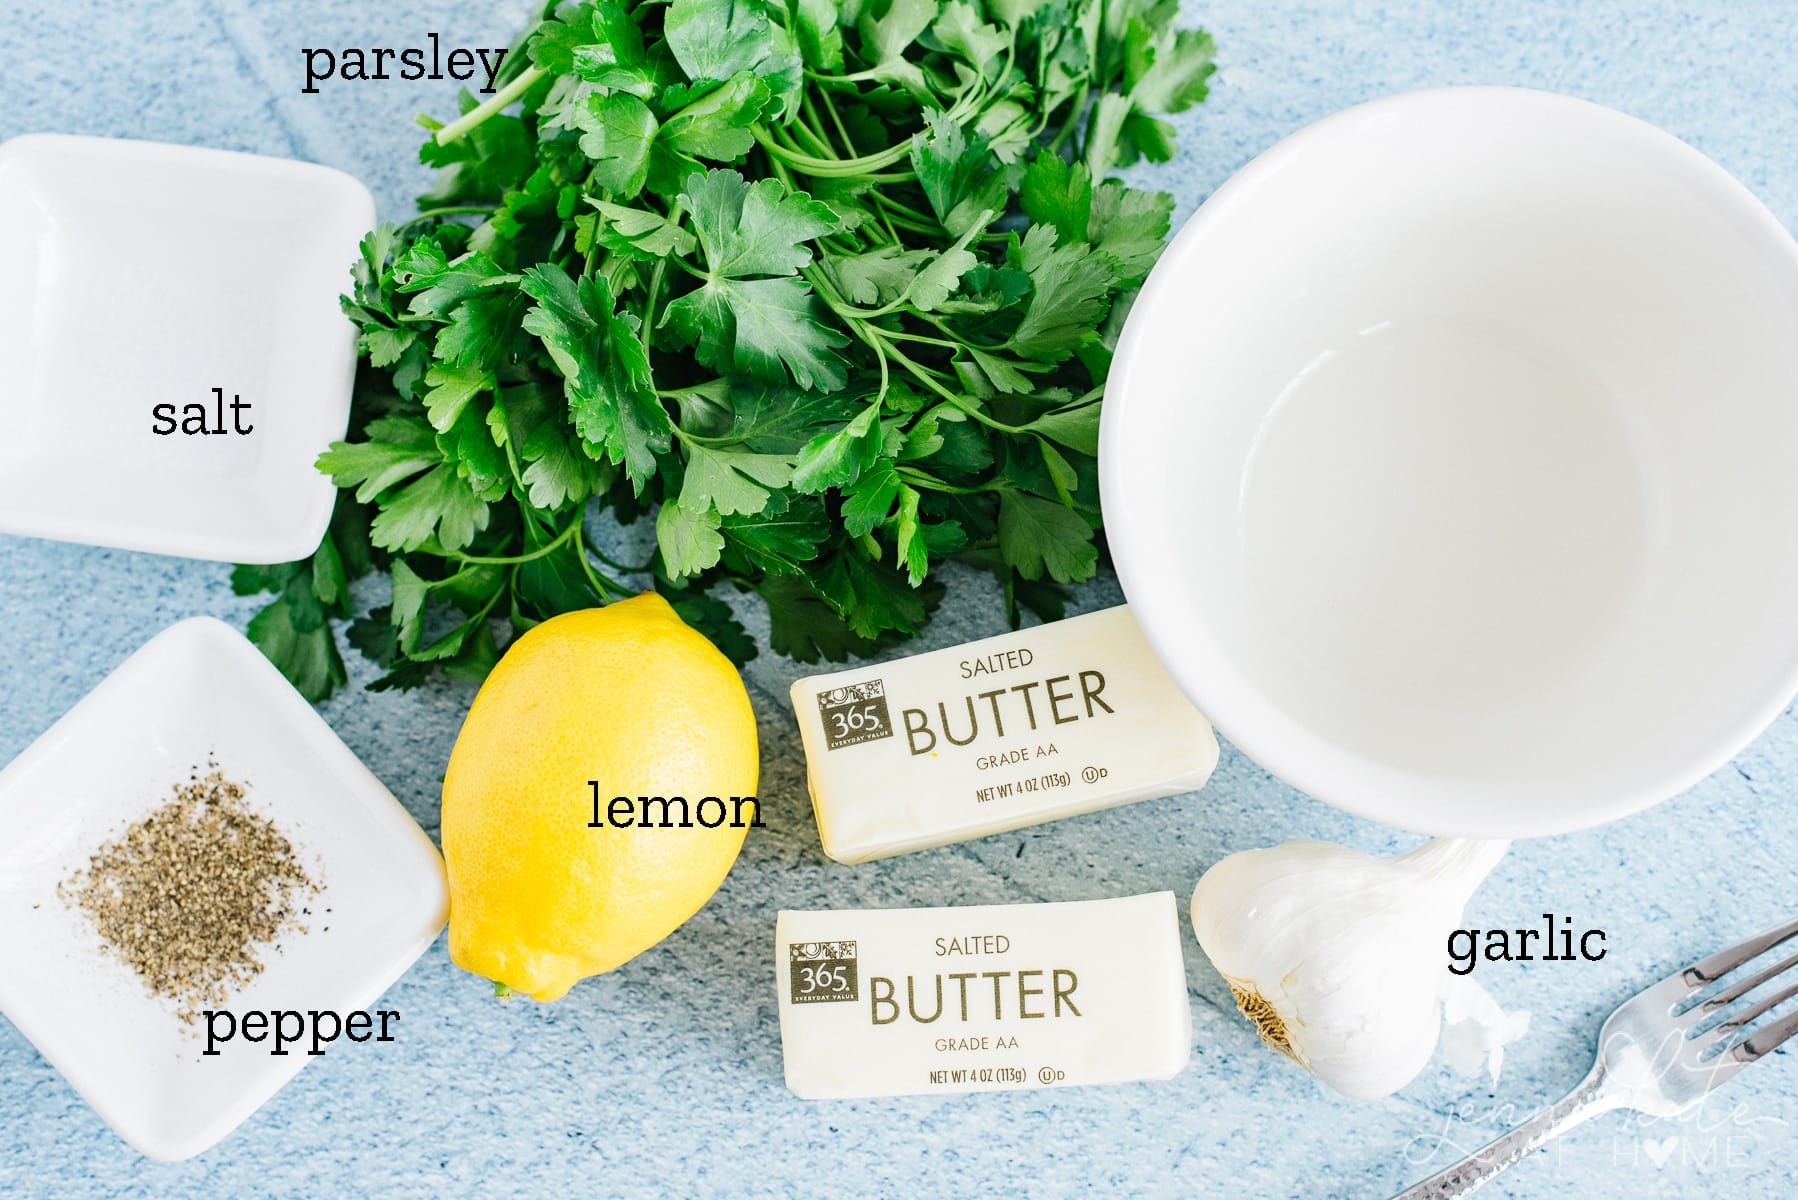 ingredients for the garlic herb butter